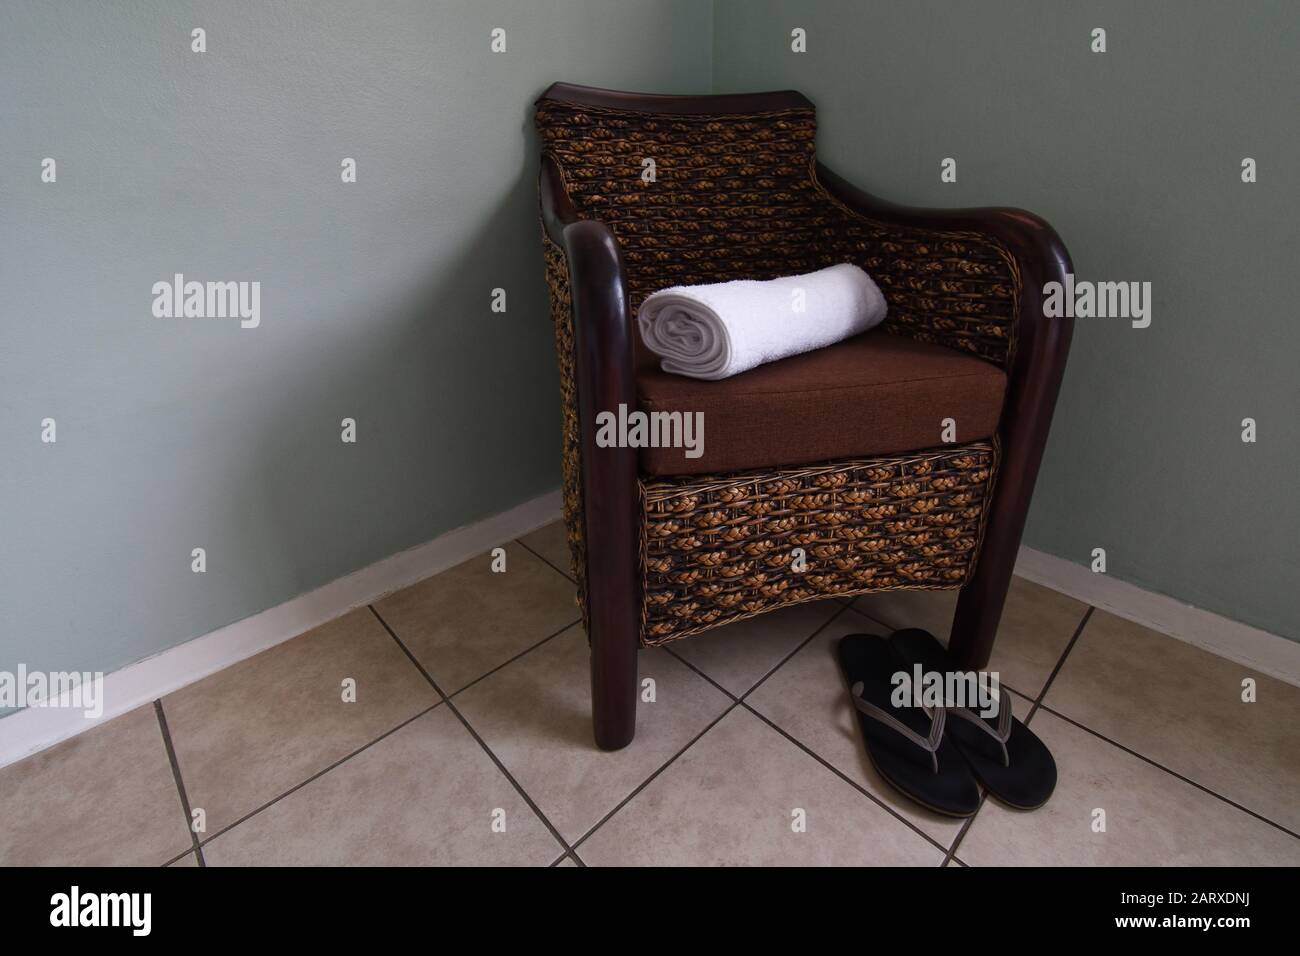 Rattan Armchair With Clean Towel And Shower Slippers Stock Photo